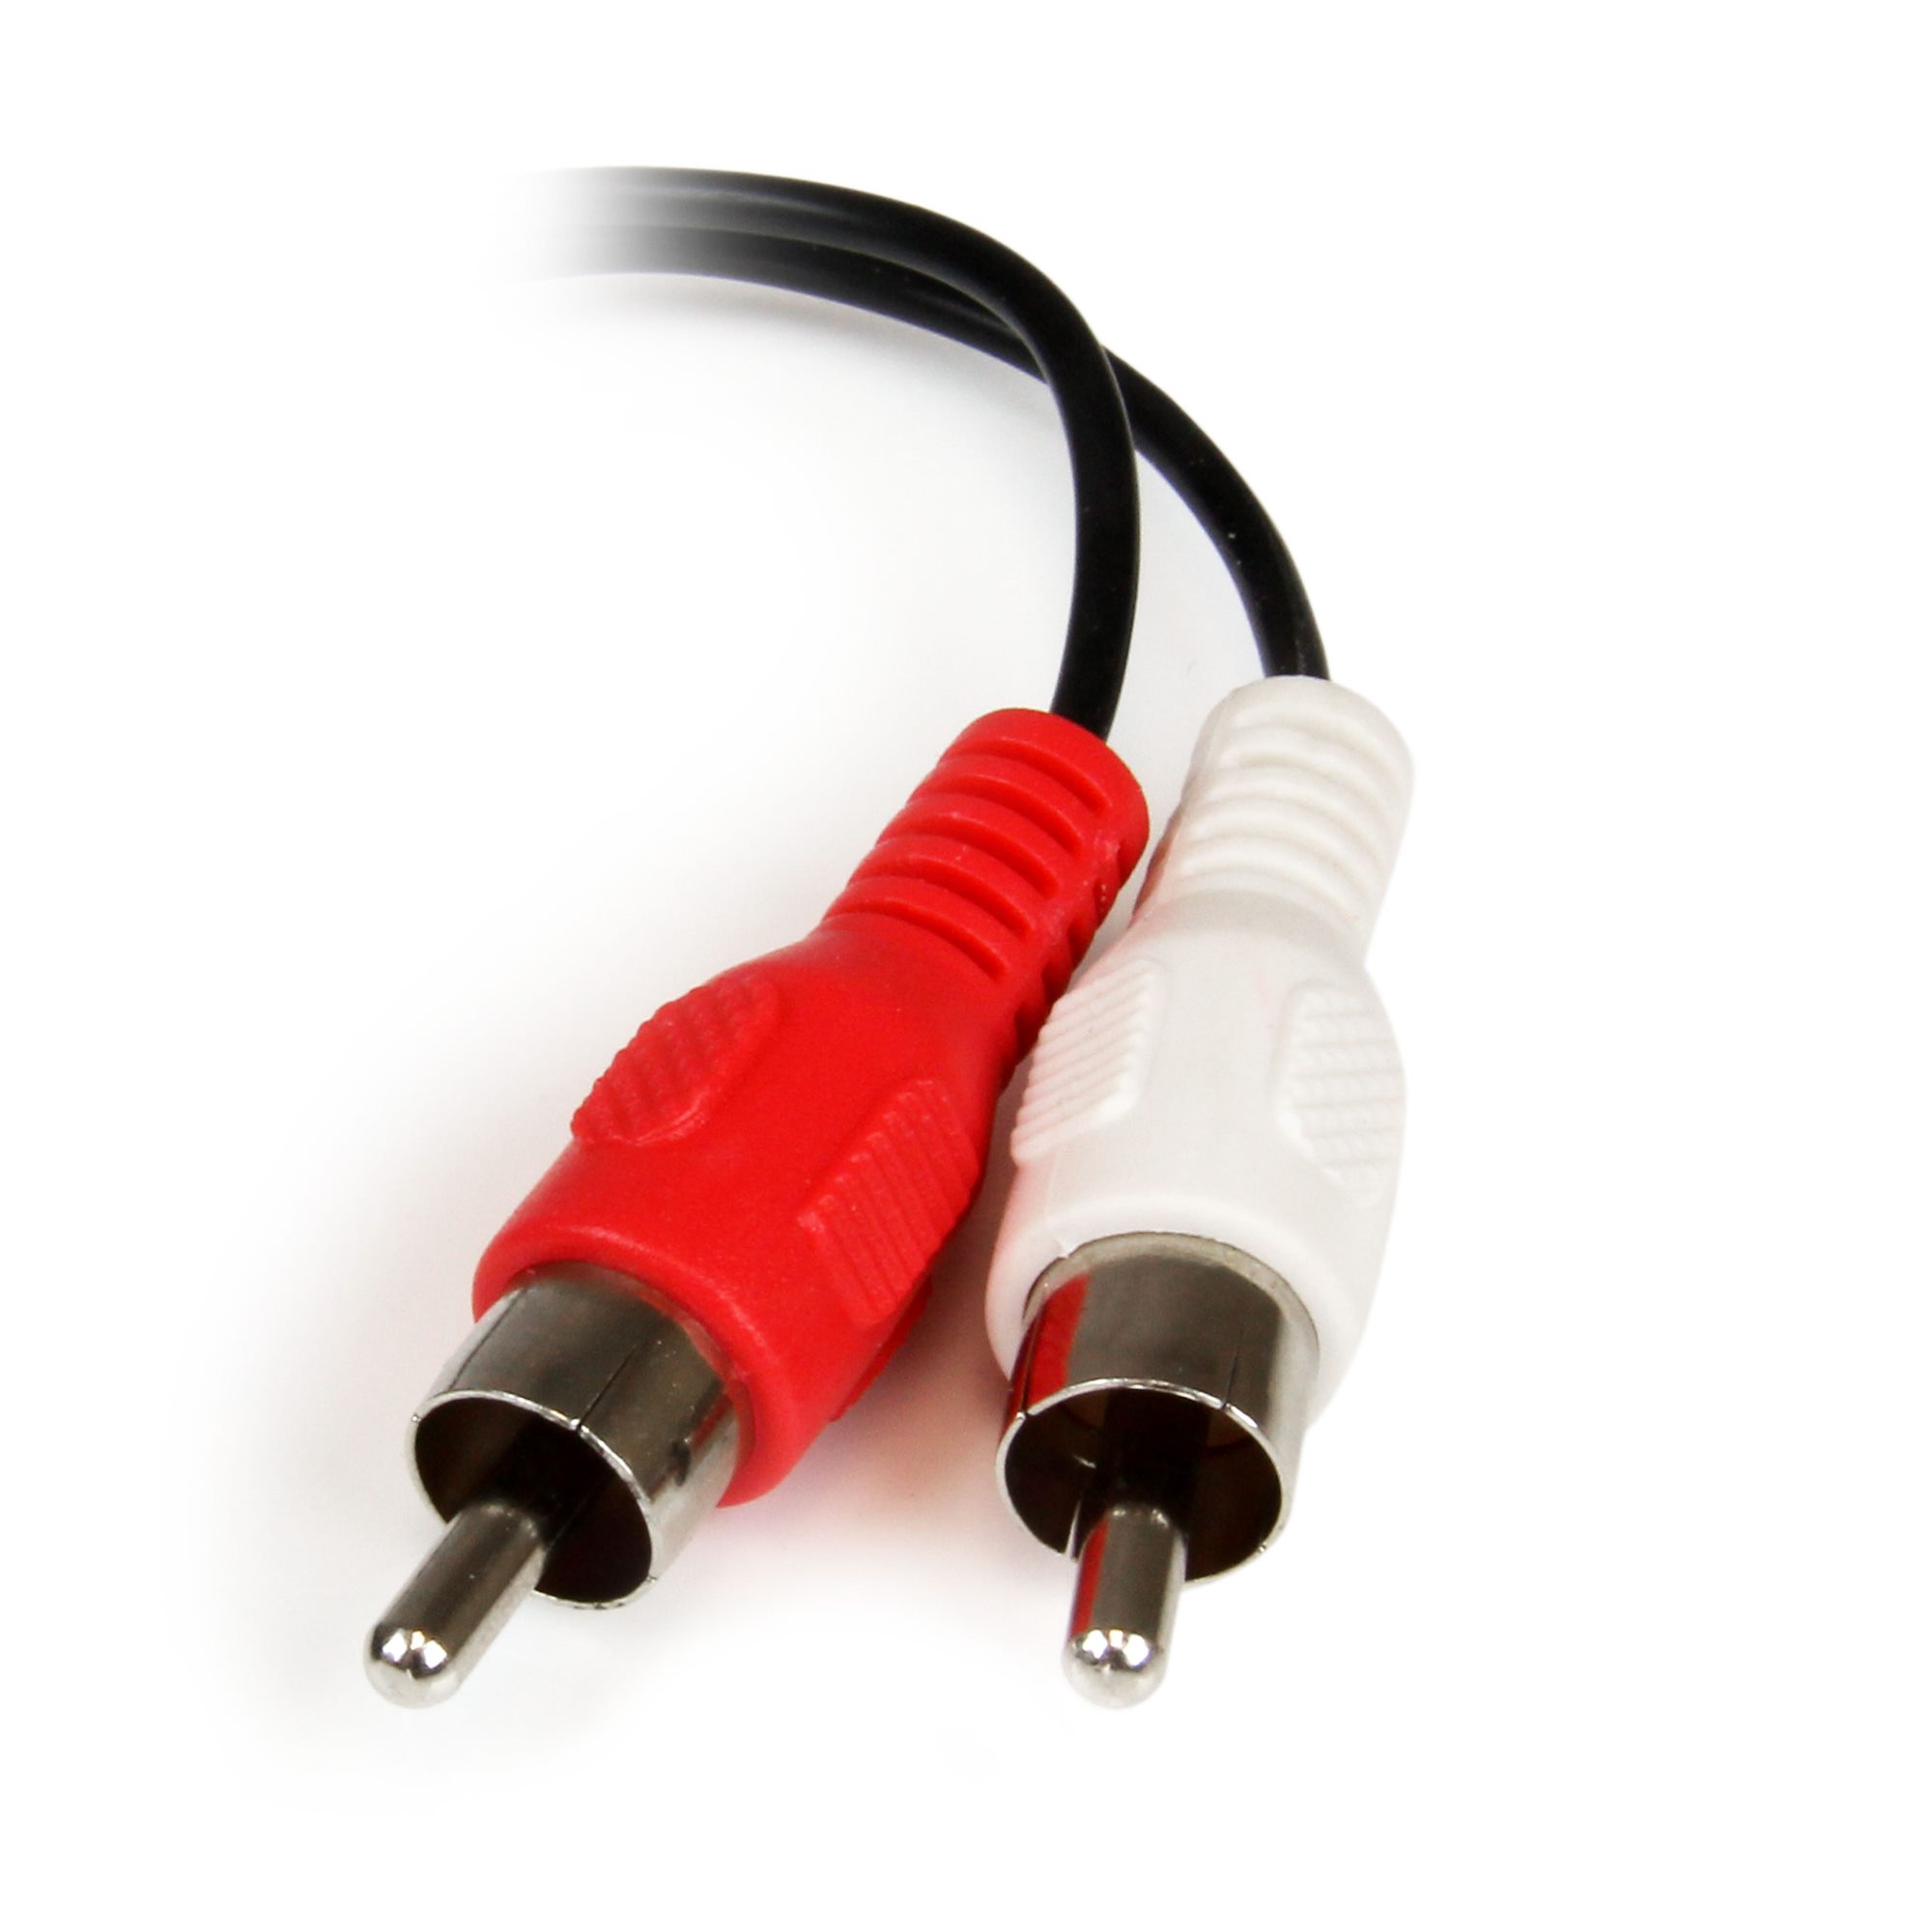 Sindicato Piquete radical 6in Stereo 3.5mm (M) to 2x RCA (F) Cable - Audio Cables and Adapters |  StarTech.com